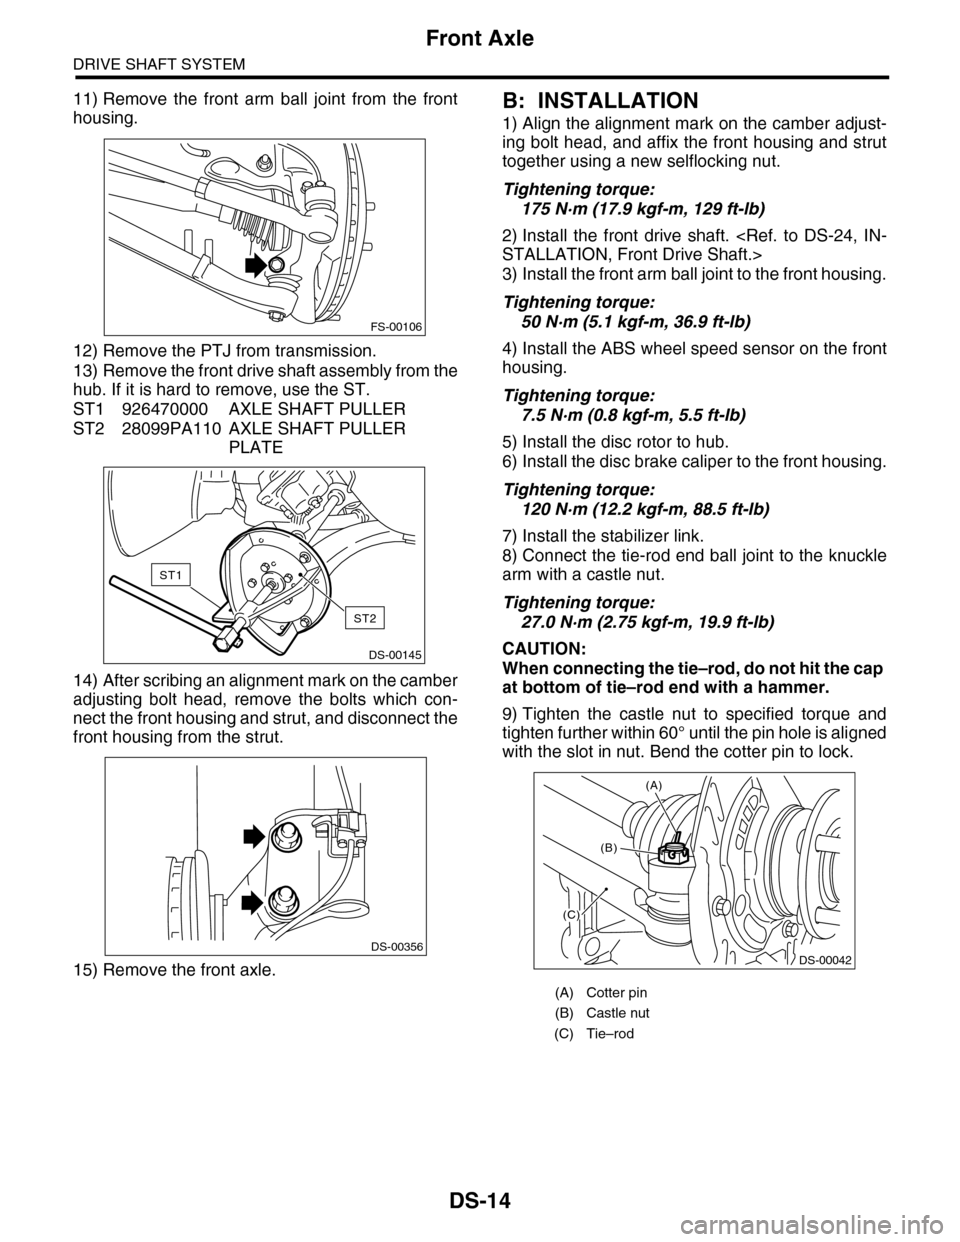 SUBARU TRIBECA 2009 1.G Service Workshop Manual DS-14
Front Axle
DRIVE SHAFT SYSTEM
11) Remove  the  front  arm  ball  joint  from  the  front
housing.
12) Remove the PTJ from transmission.
13) Remove the front drive shaft assembly from the
hub. If